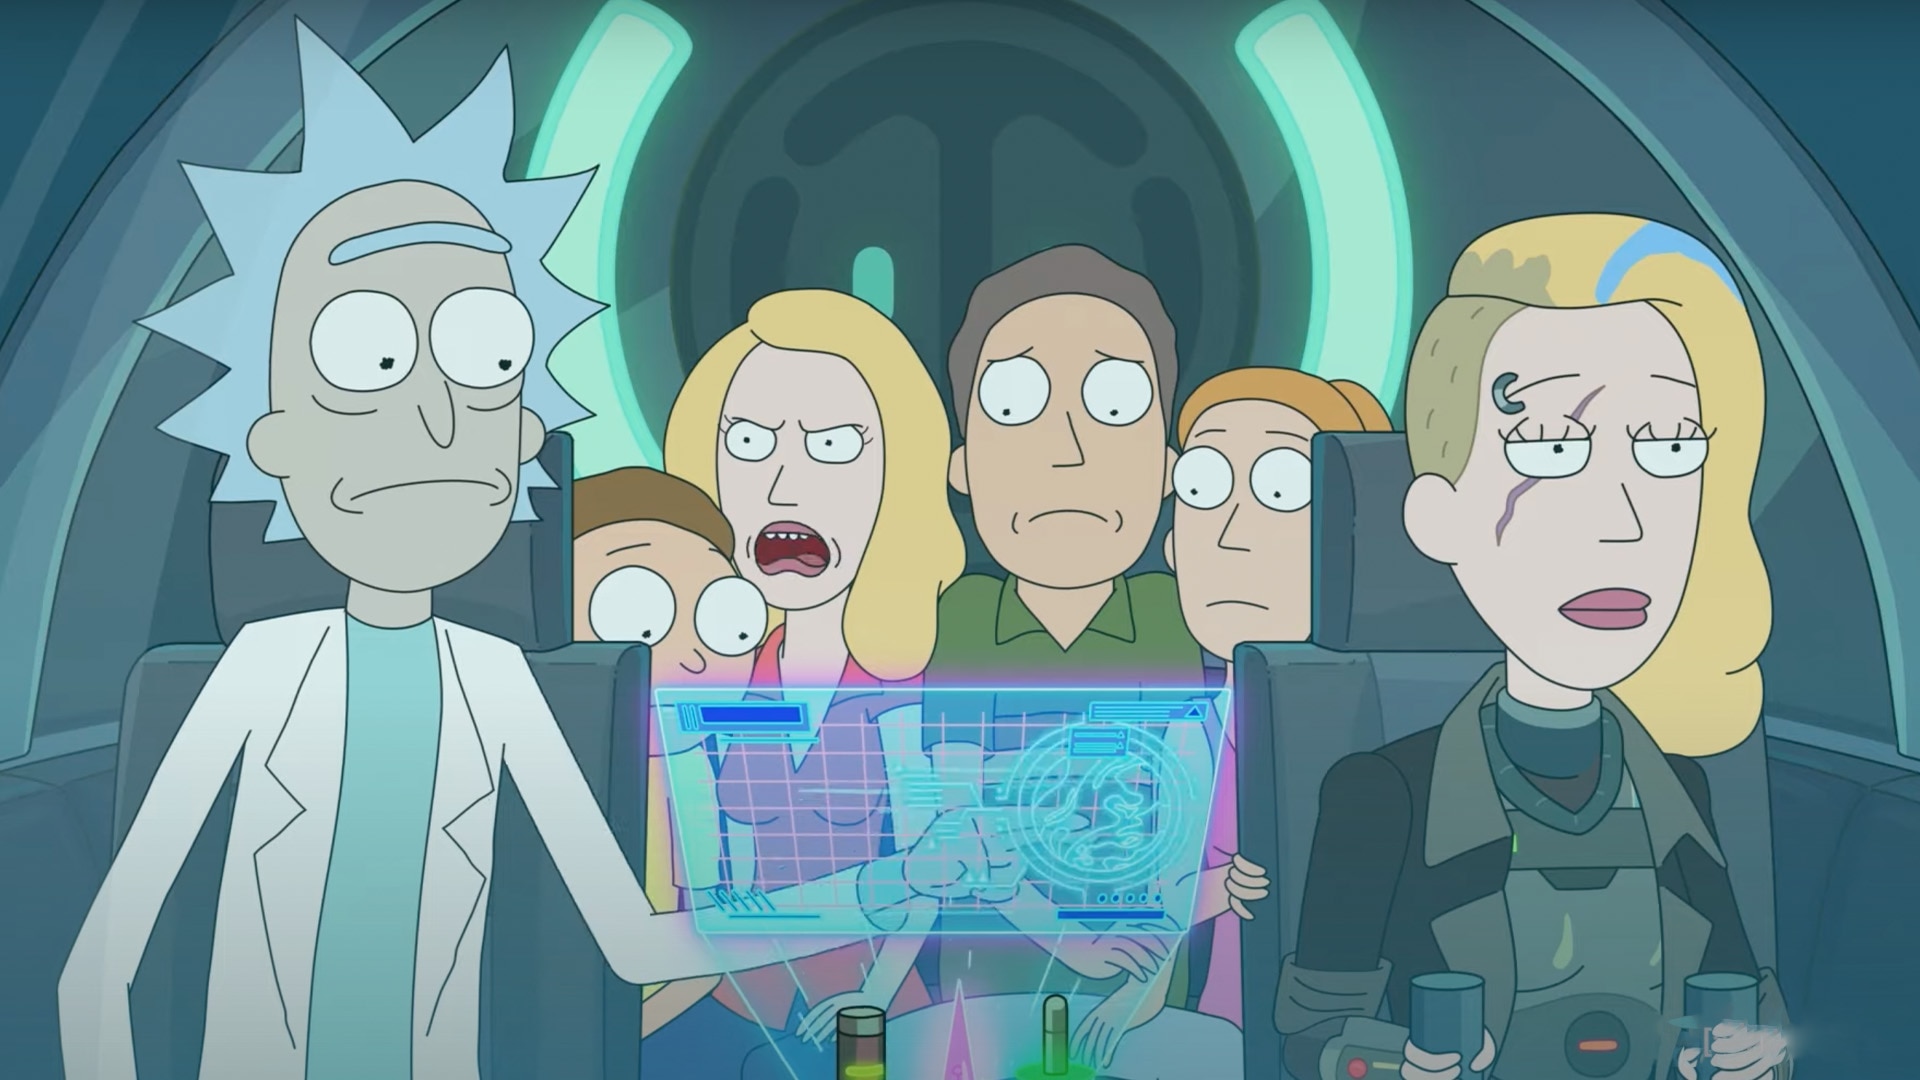 Rick and Morty Season 5: Where to Watch & Stream Online